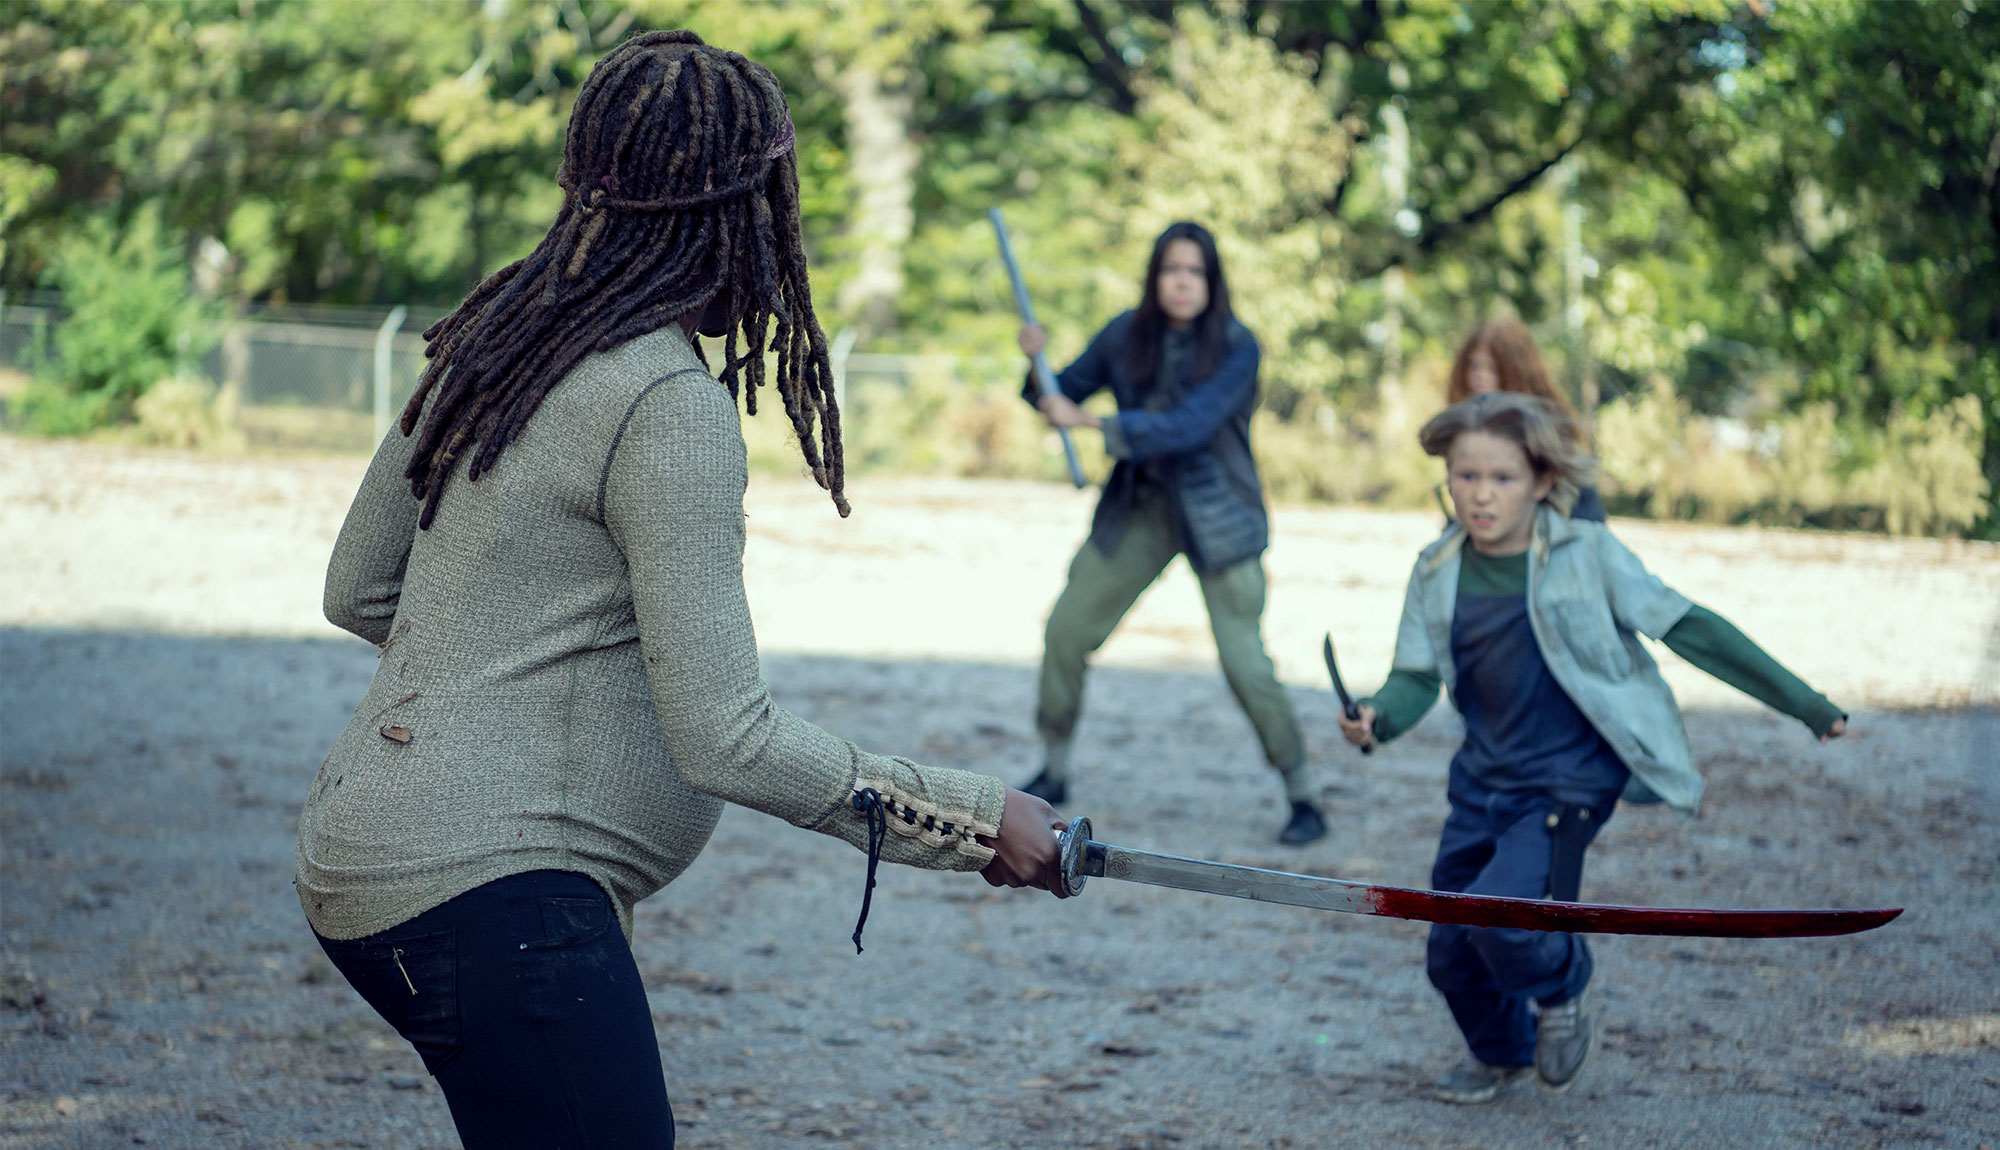 Michonne Saves Judith In Shocking Scene From The Walking Dead Episode 914